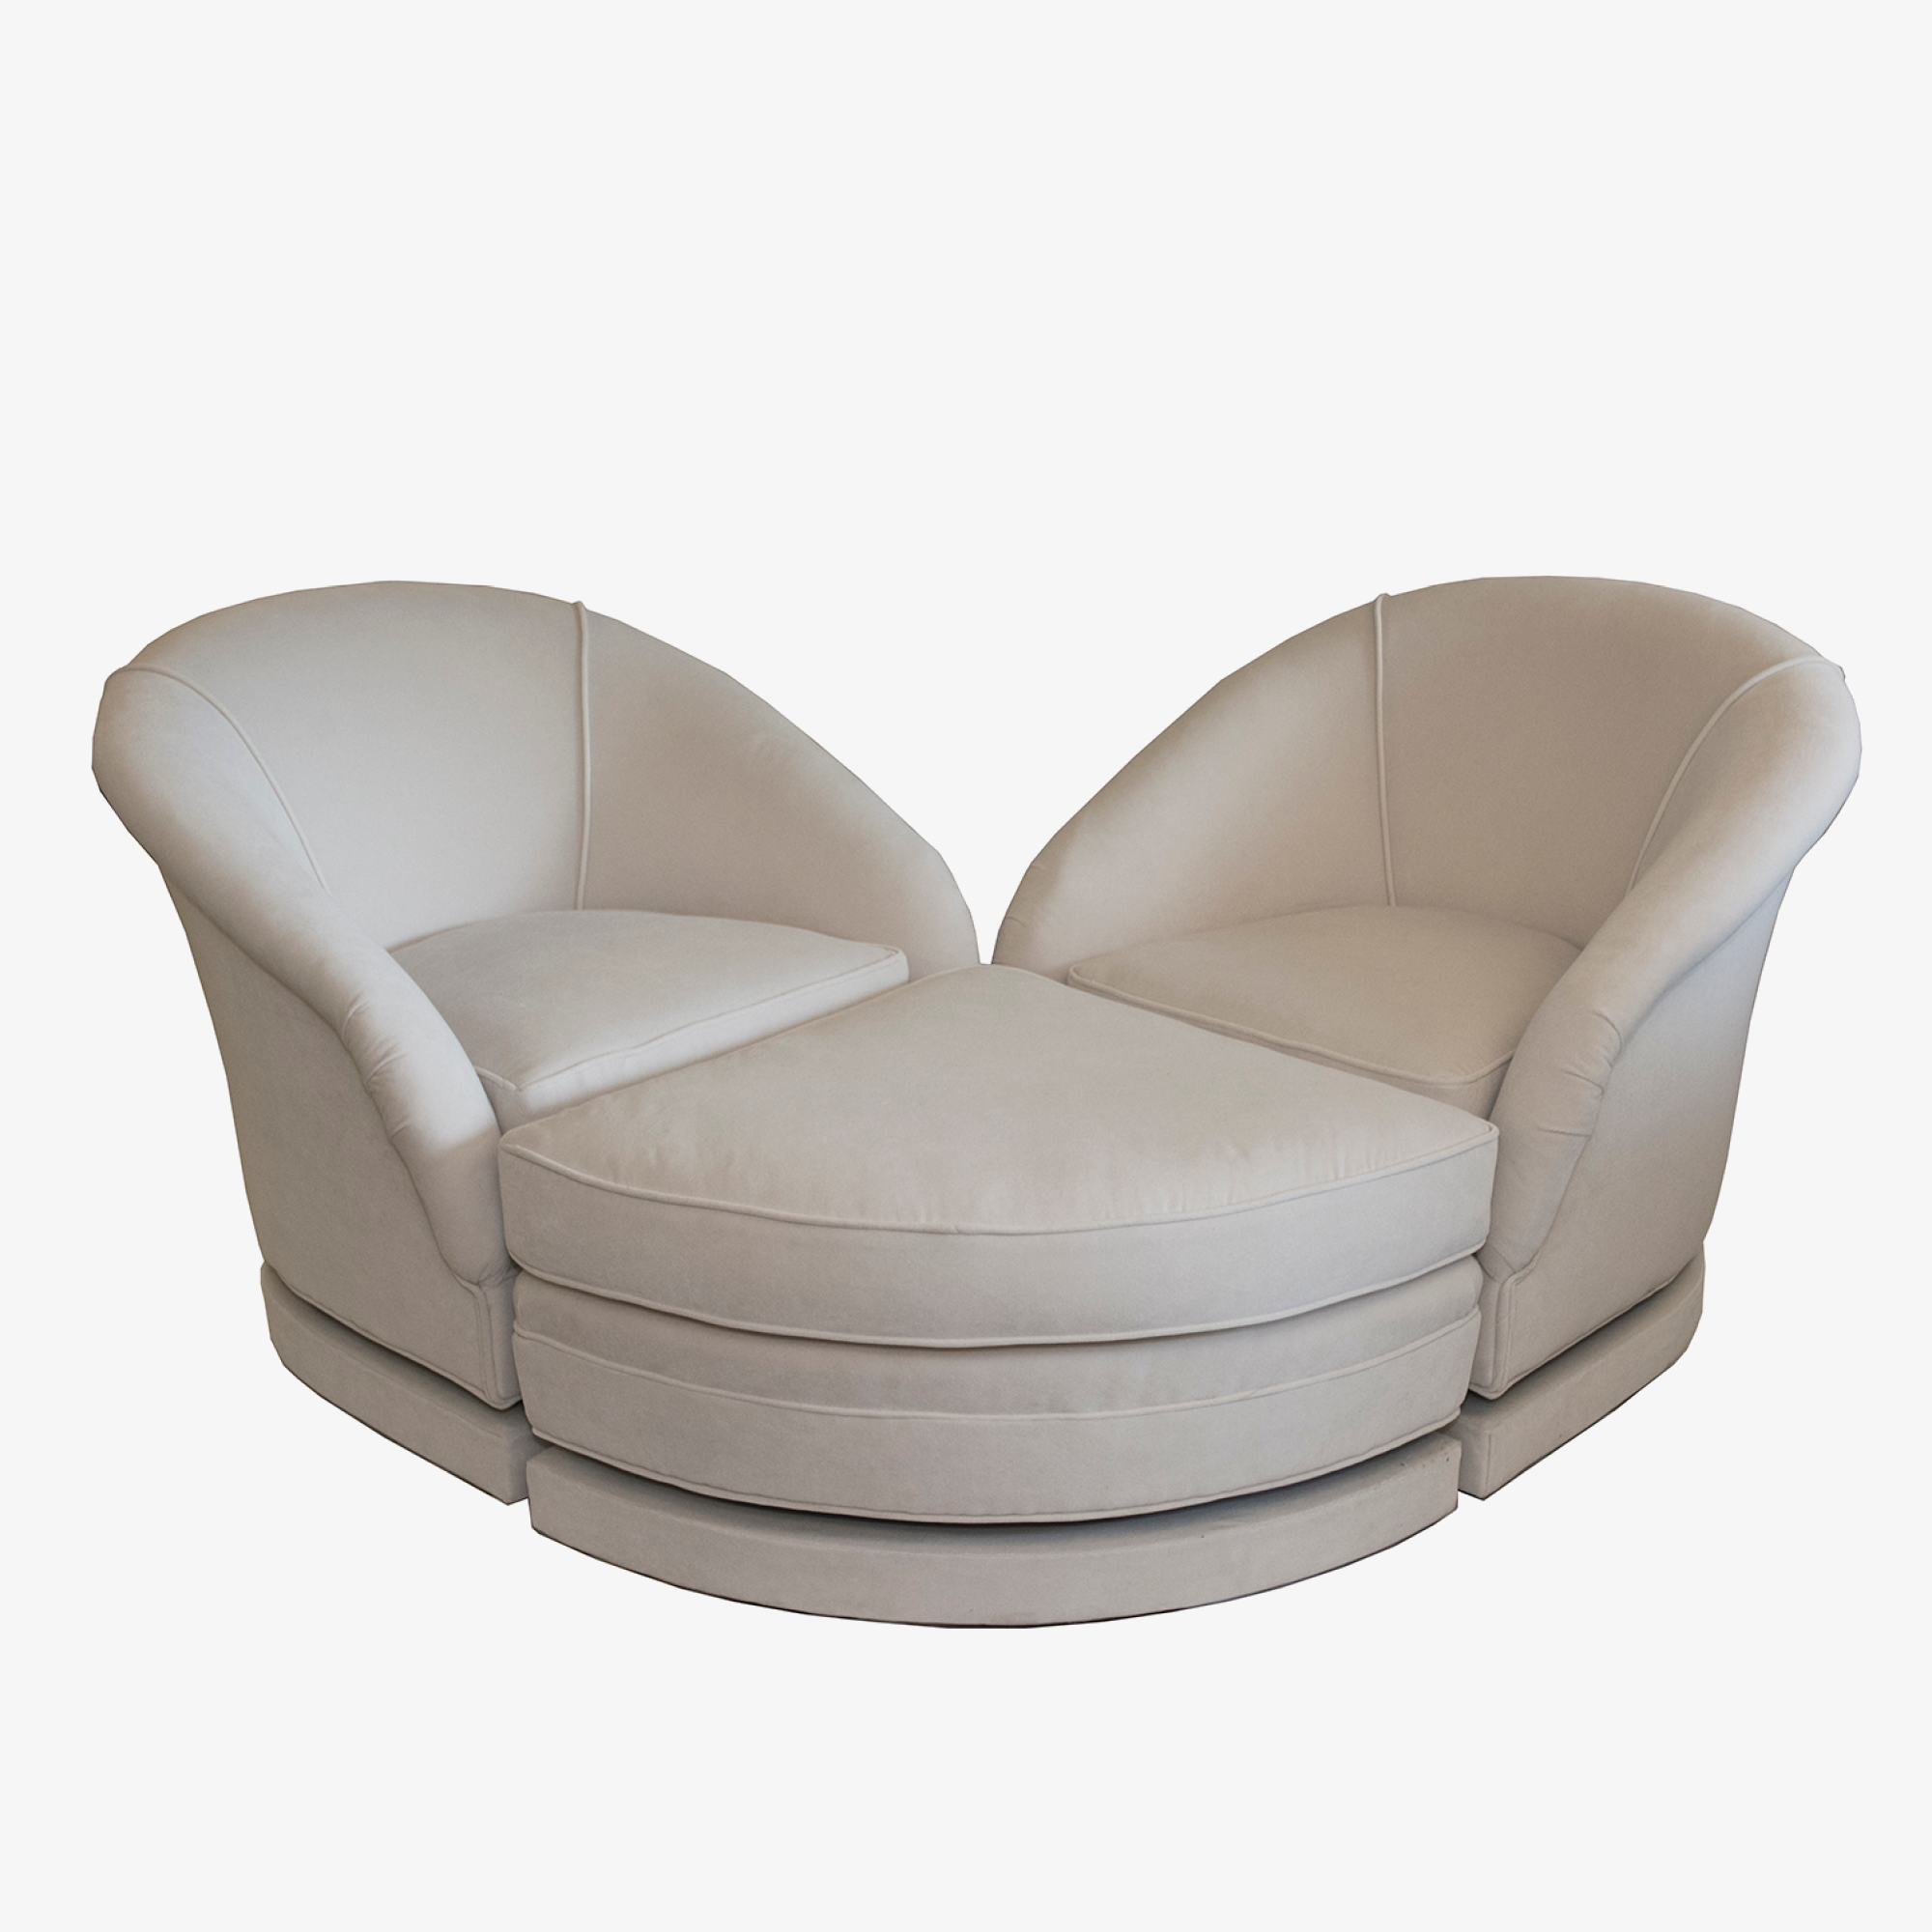 Bespoke Set of Swivel Chairs with Custom Ottoman 1.png